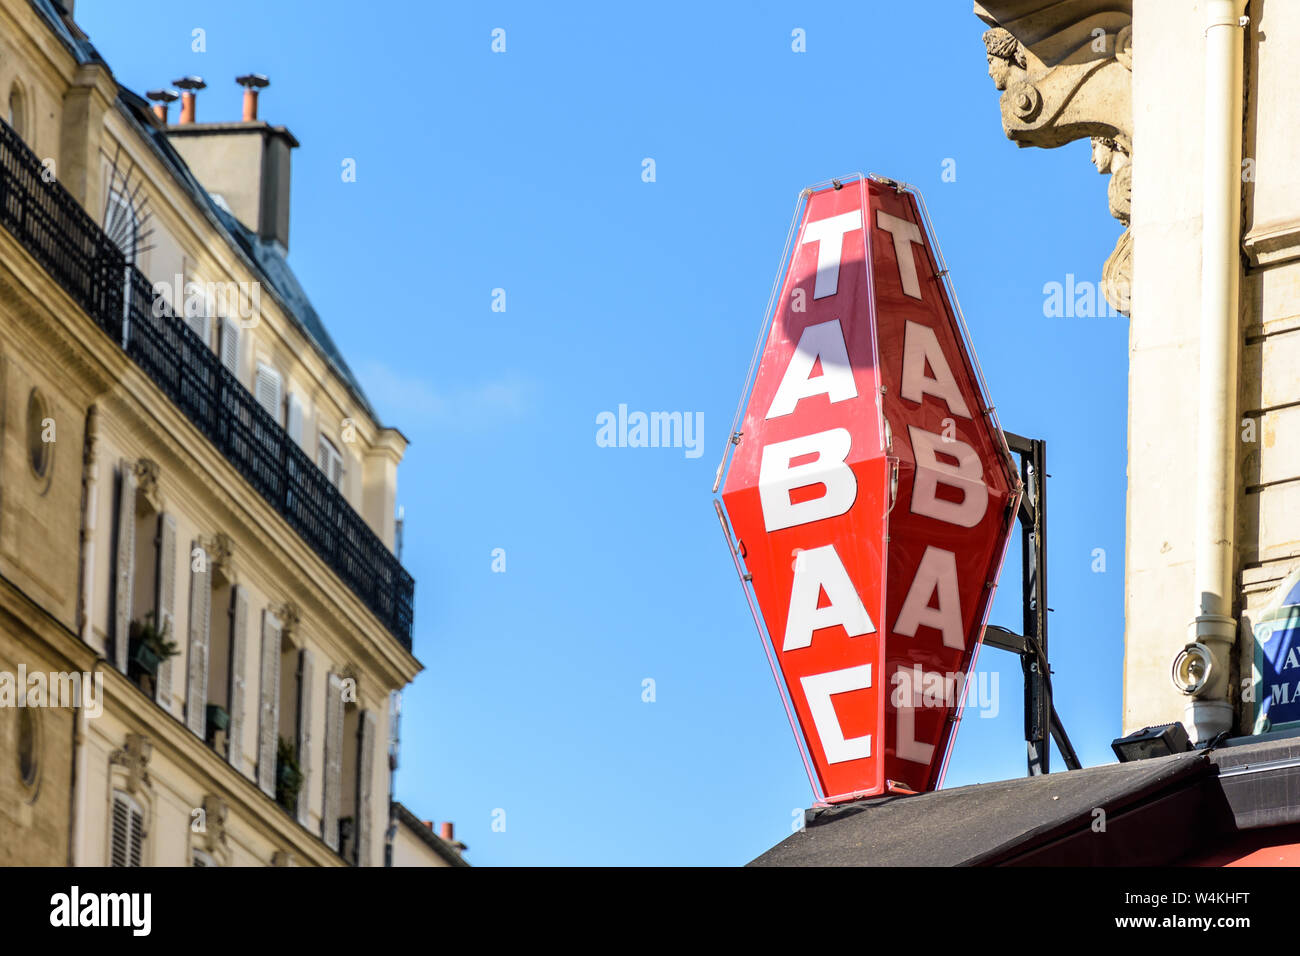 Haussmannian High Resolution Stock Photography and Images - Alamy